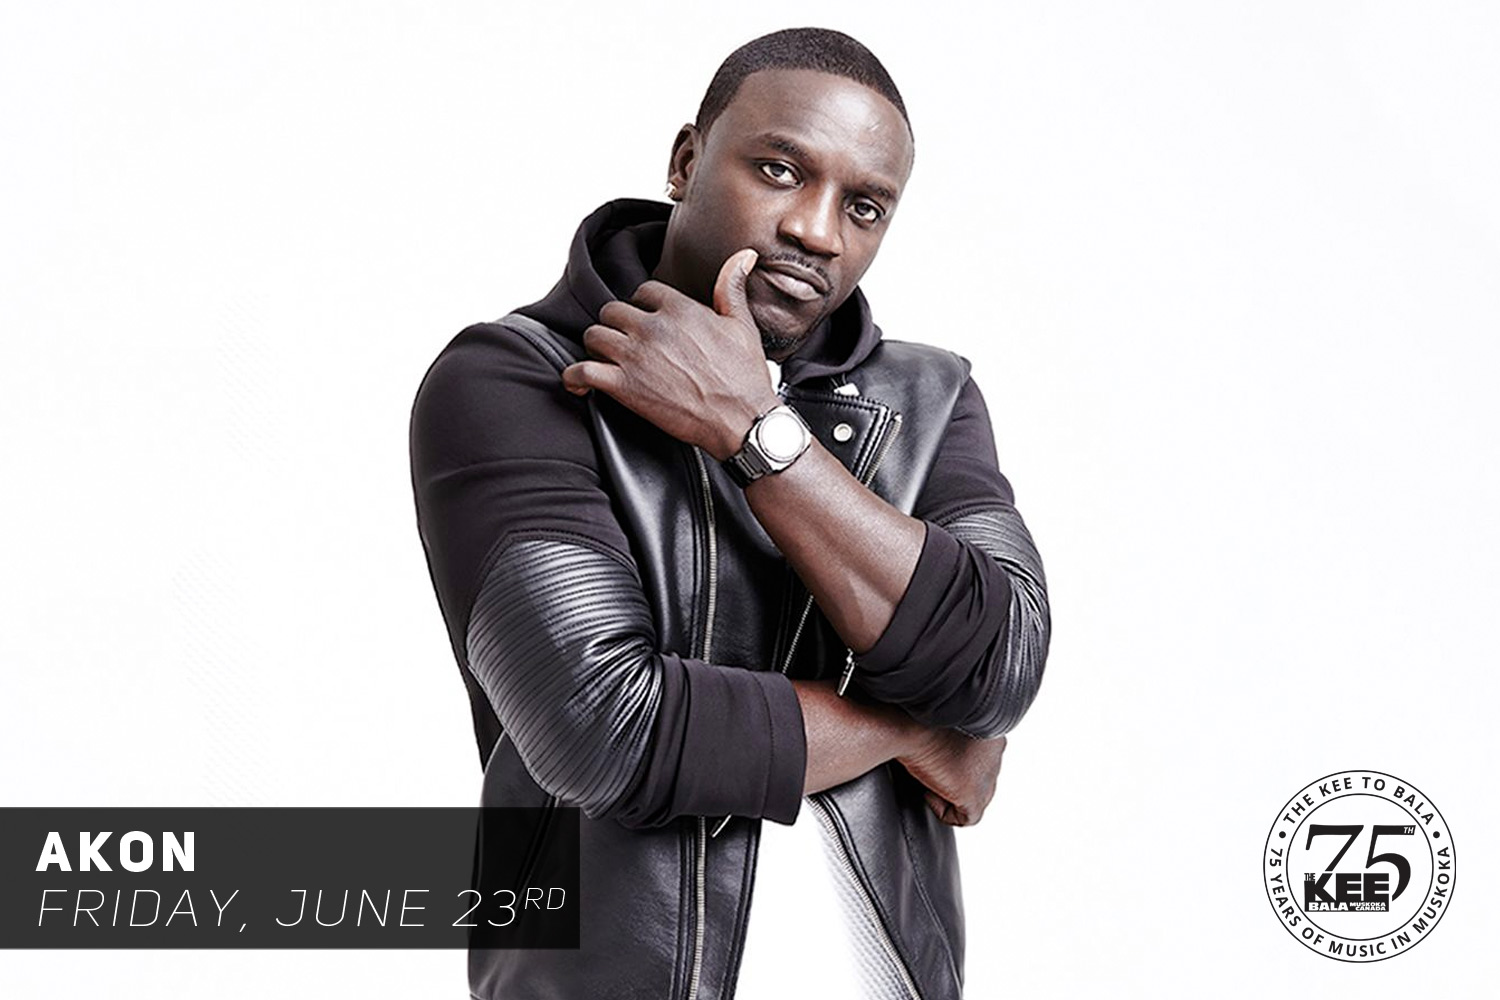 Akon Live in Concert at The Kee to Bala